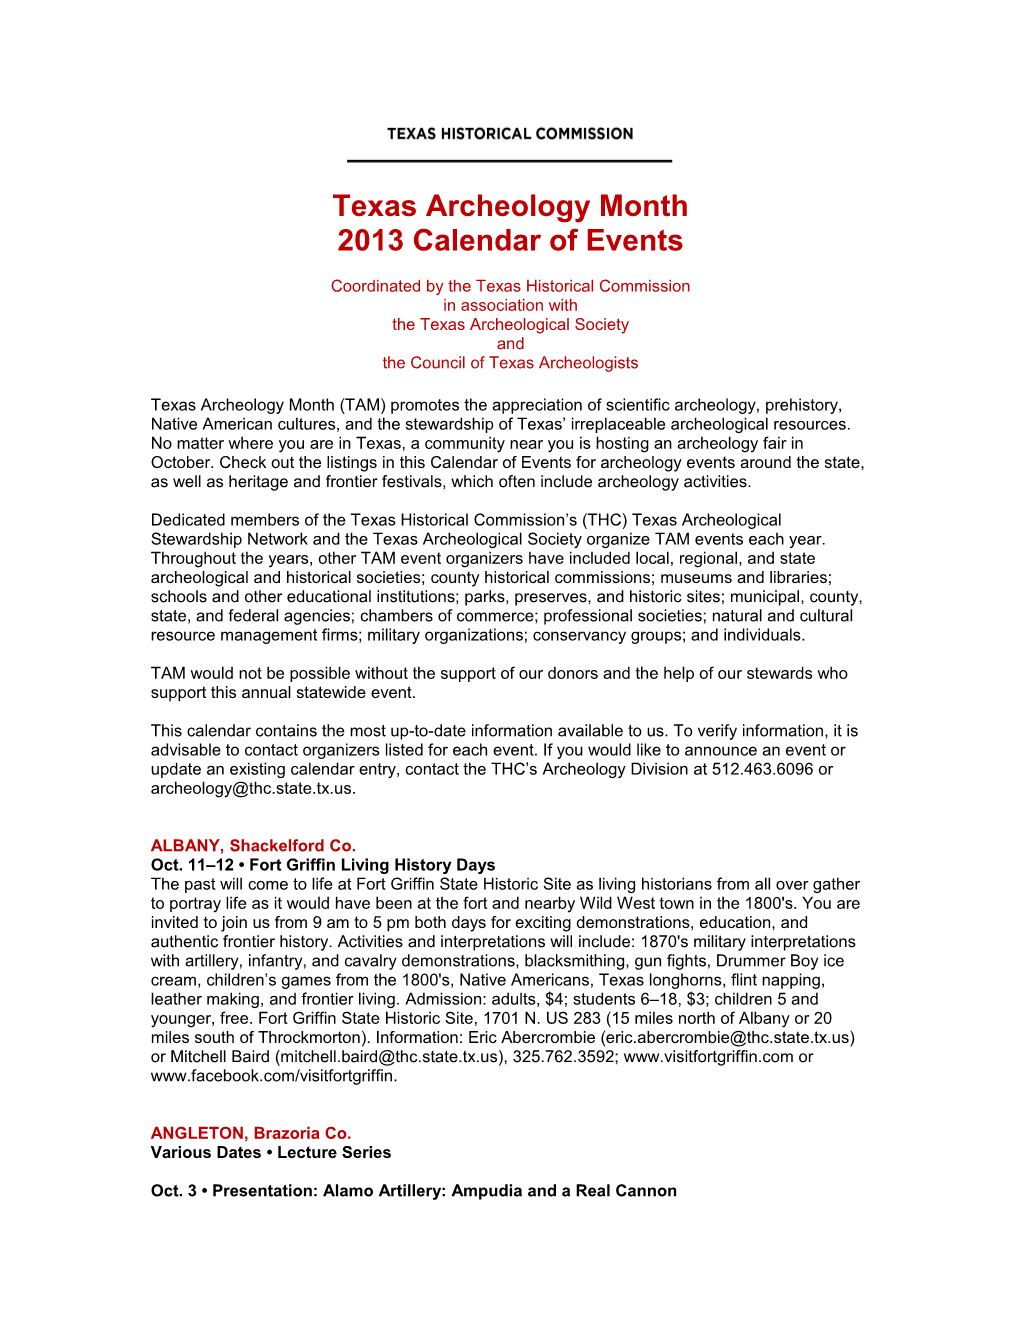 Texas Archeology Month (TAM) Promotes The Appreciation Of Scientific Archeology, Prehistory, Native American Cultures, And The